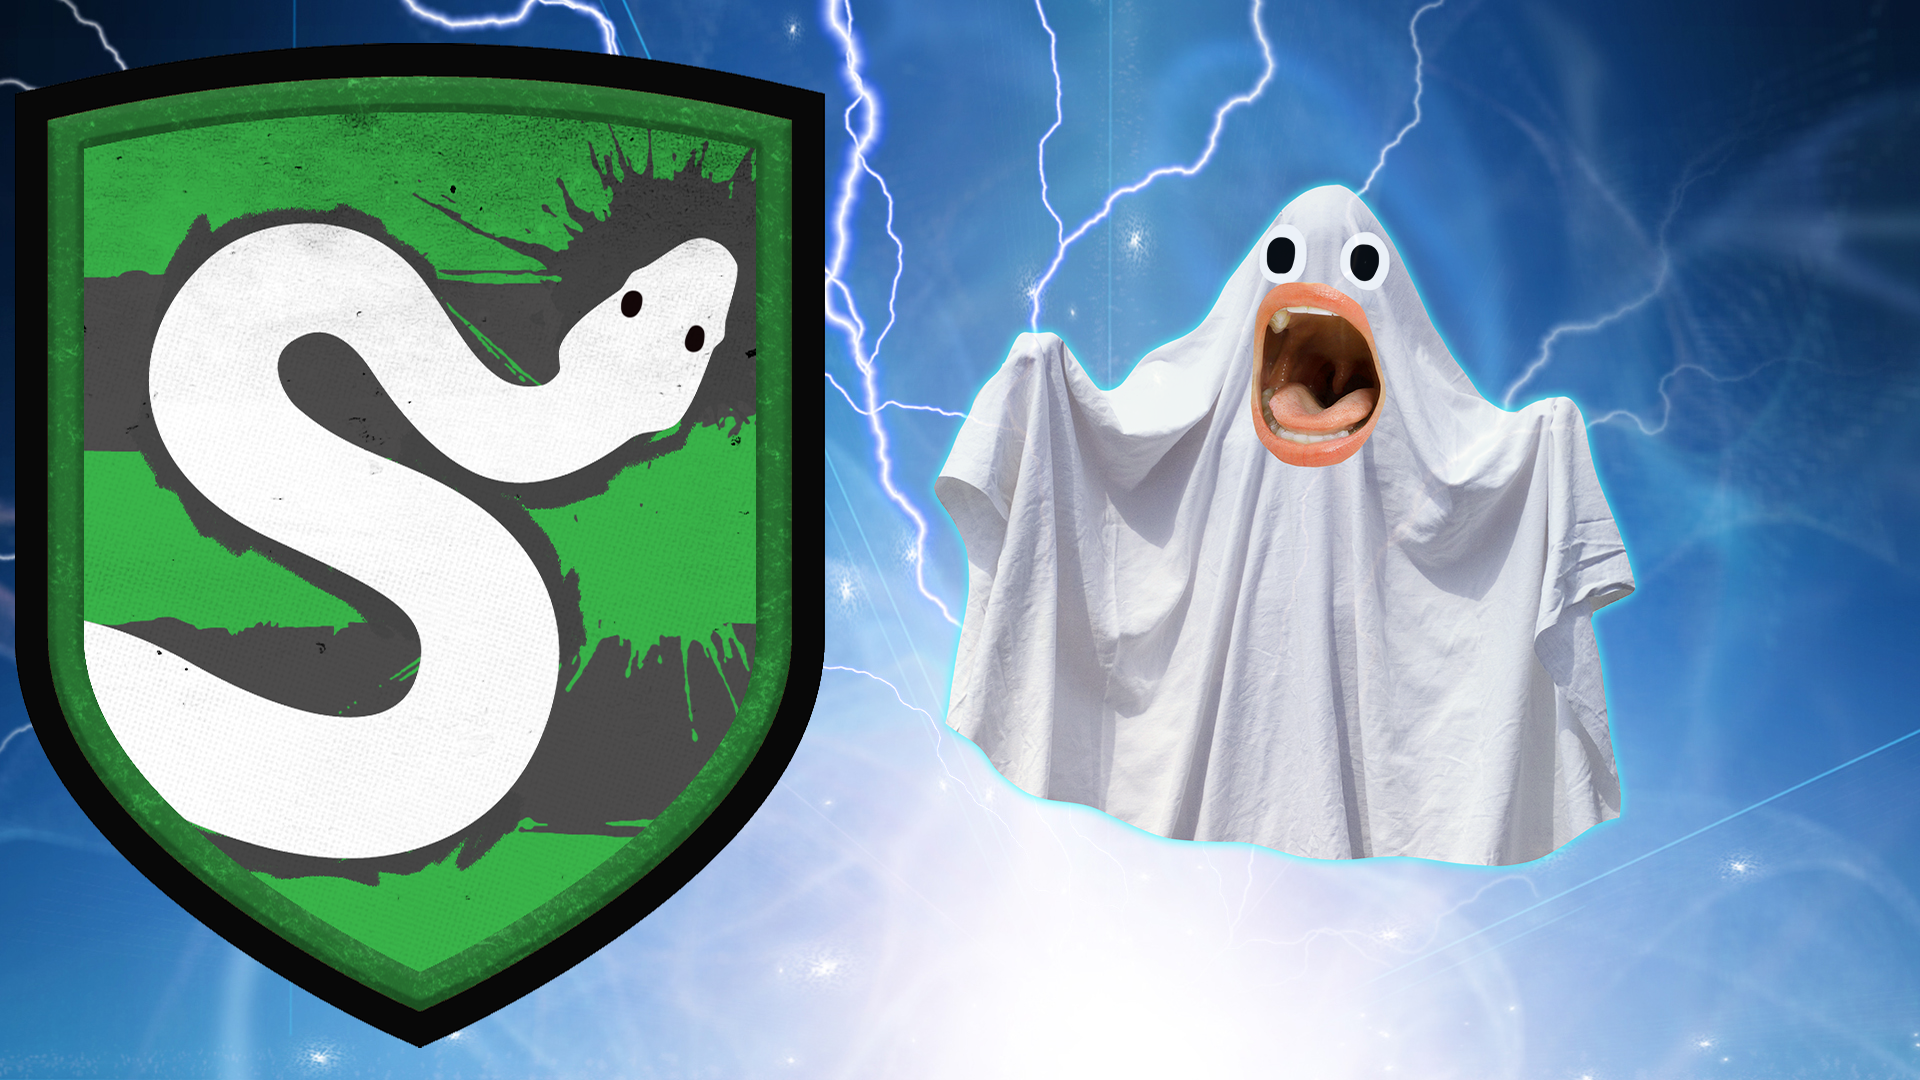 Slytherin crest and ghost